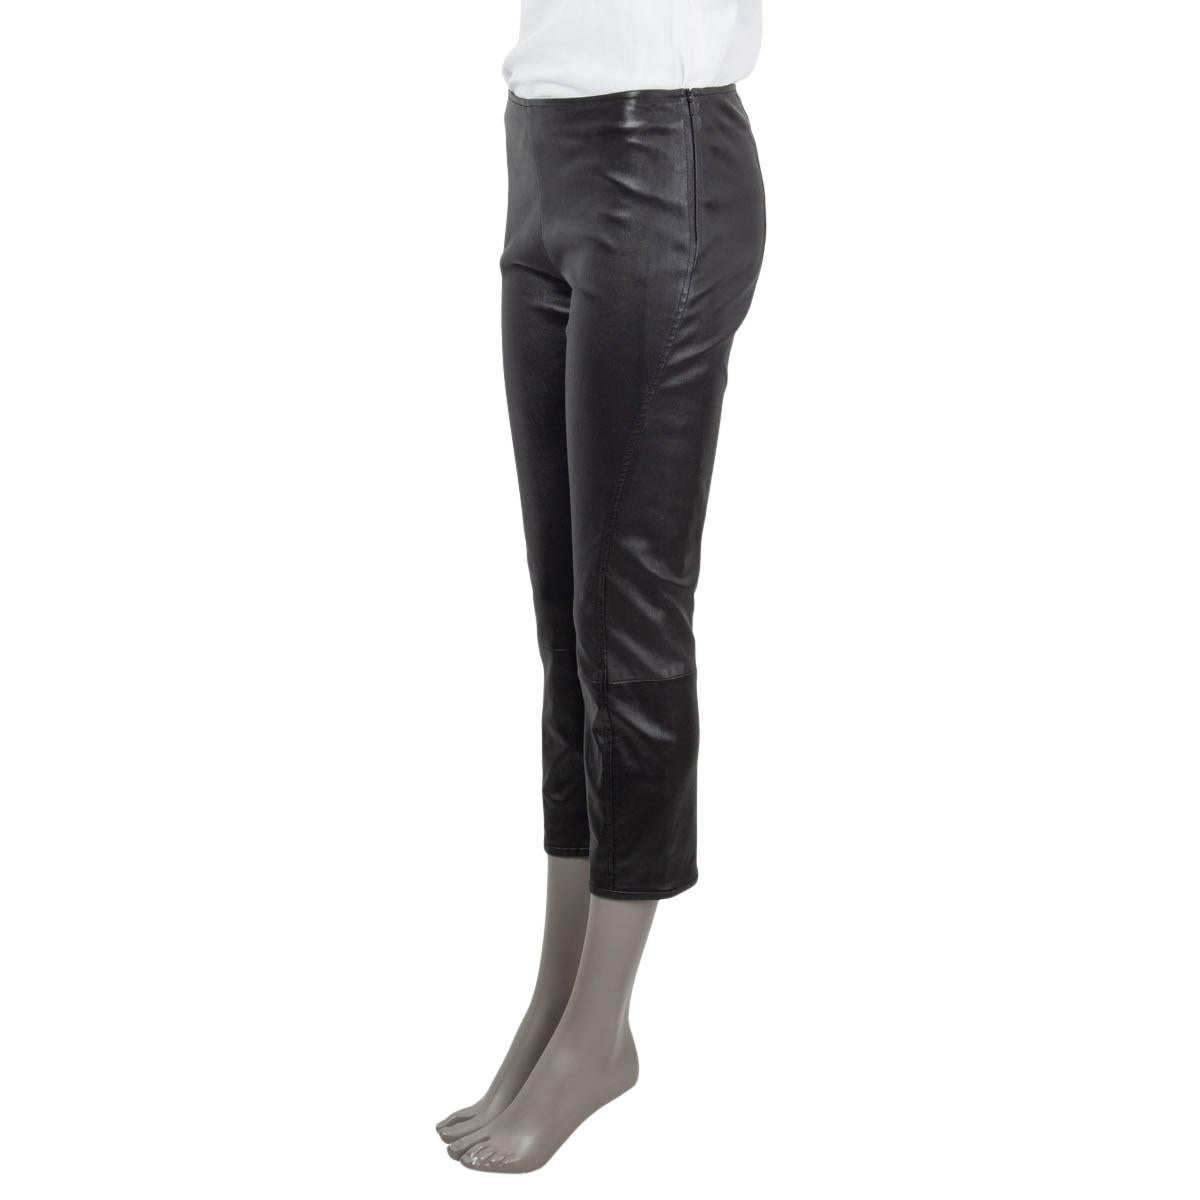 100% authentic The Row Capri pants in shiny black lambskin leather (100%). Lined in black silk (93%) and elastane (7%) and bonded with cotton (97%) and elastane (3%). Opens with a zipper on the left side and is stretchy with a slim fit. Has been